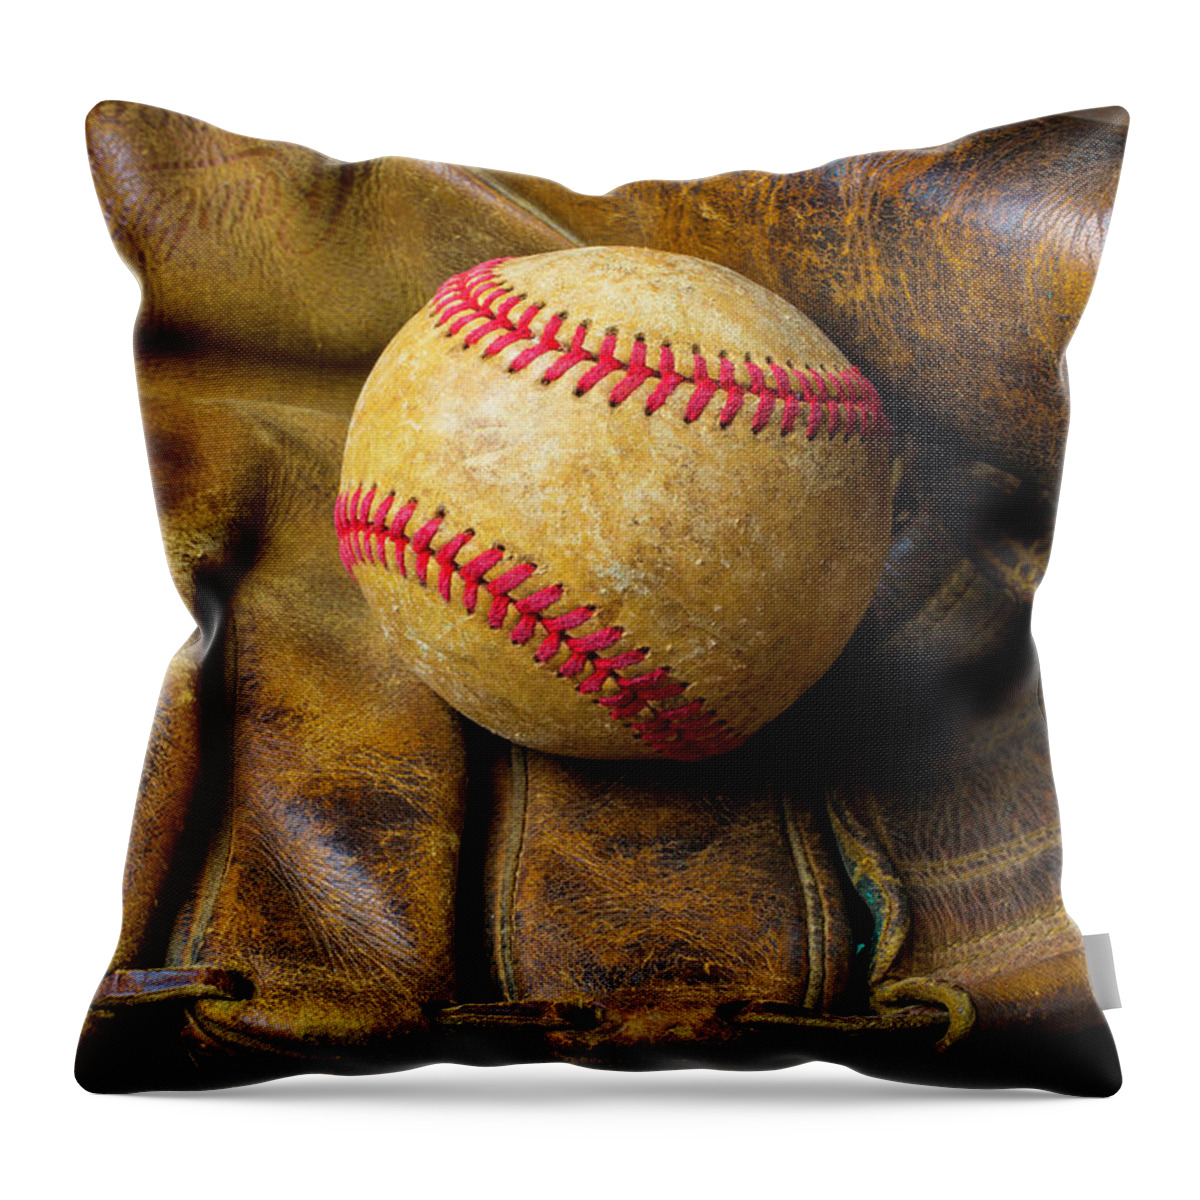 Mitts Throw Pillow featuring the photograph Old Worn Ball Mitt by Garry Gay